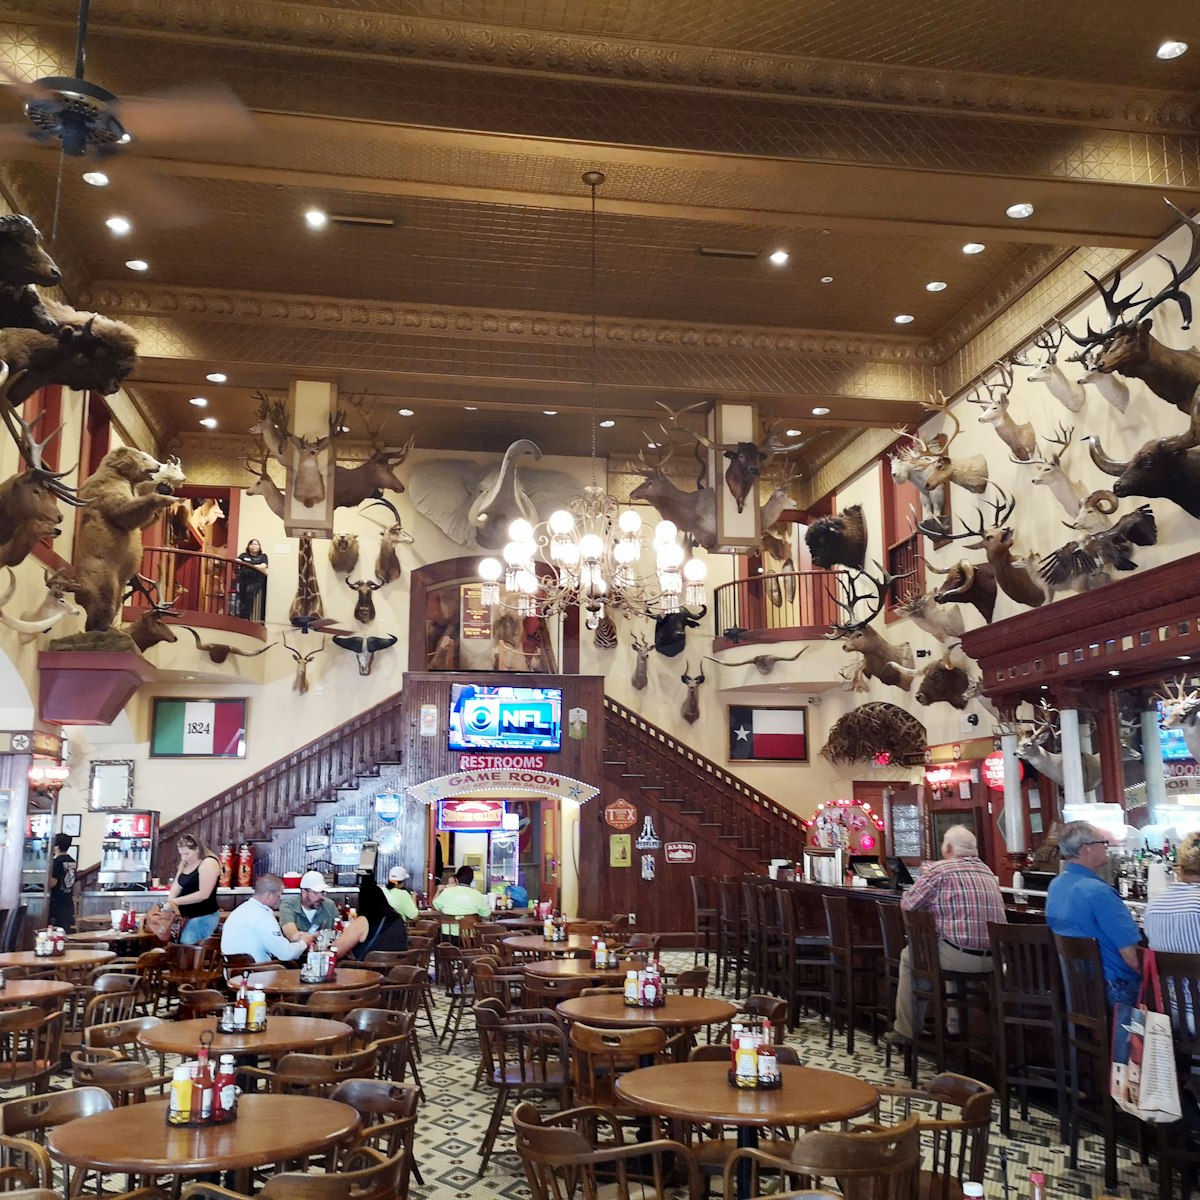 San Antonio, Texas - 30 September 2019: The famous Buckhorn Saloon and Museum ; Shutterstock ID 1656105328; your: Bridget Brown; gl: 65050; netsuite: Online Editorial; full: POI Image Update